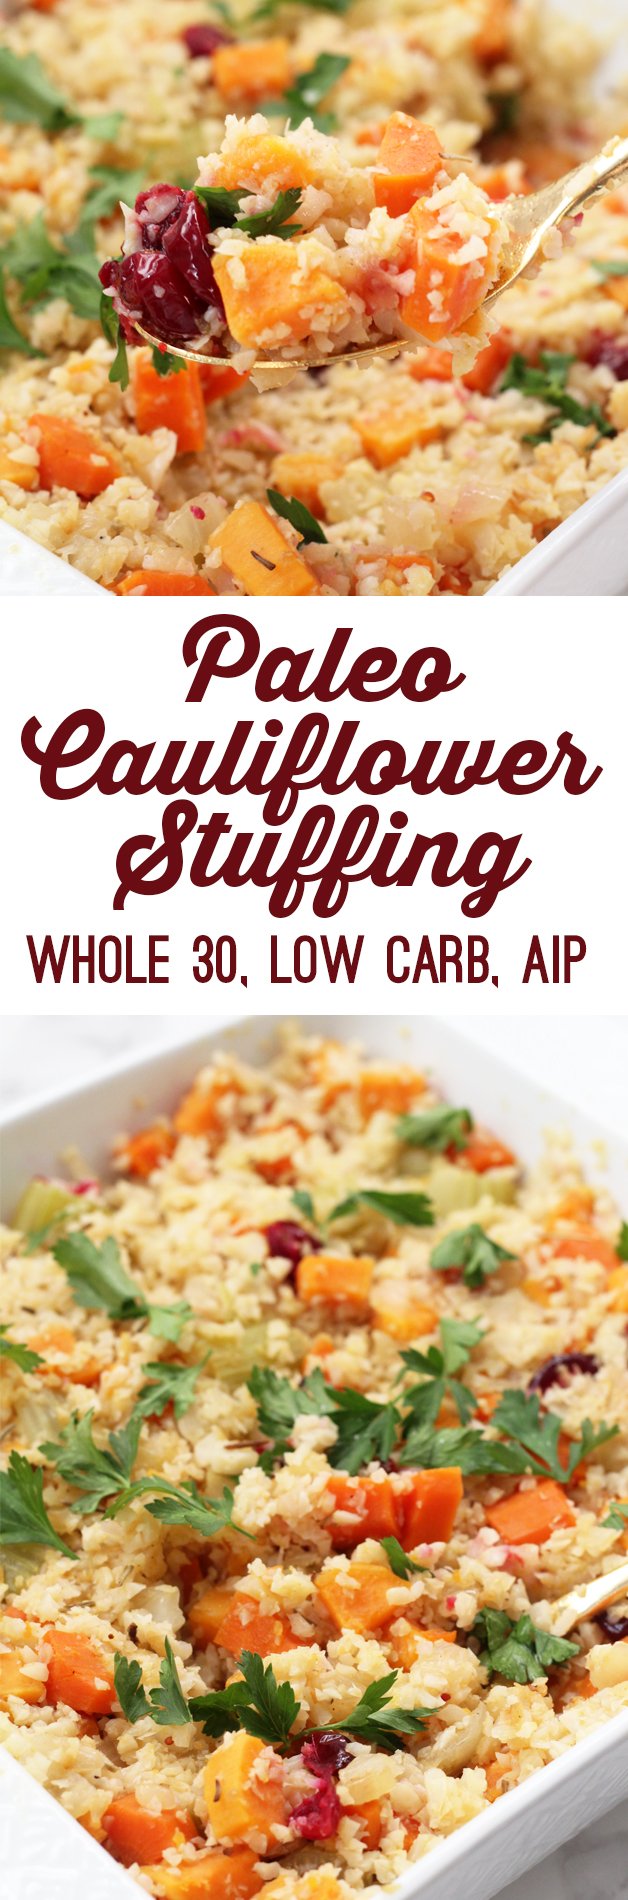 Paleo Thanksgiving Cauliflower Stuffing (AIP, Whole 30 & Low Carb)